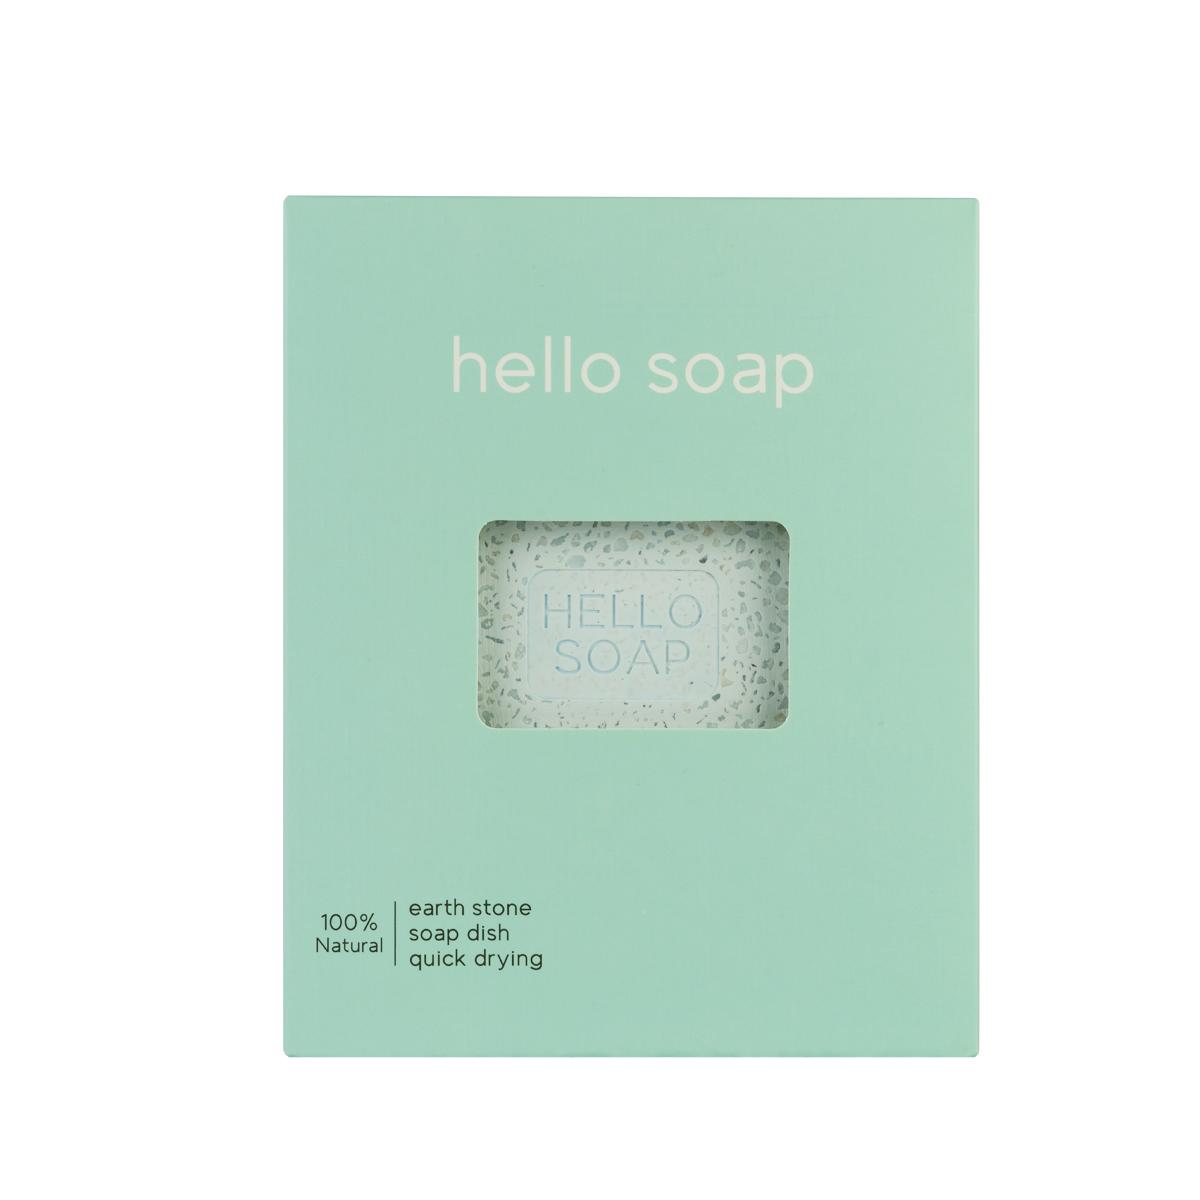 Primary image of Blue Hello Soap Holder